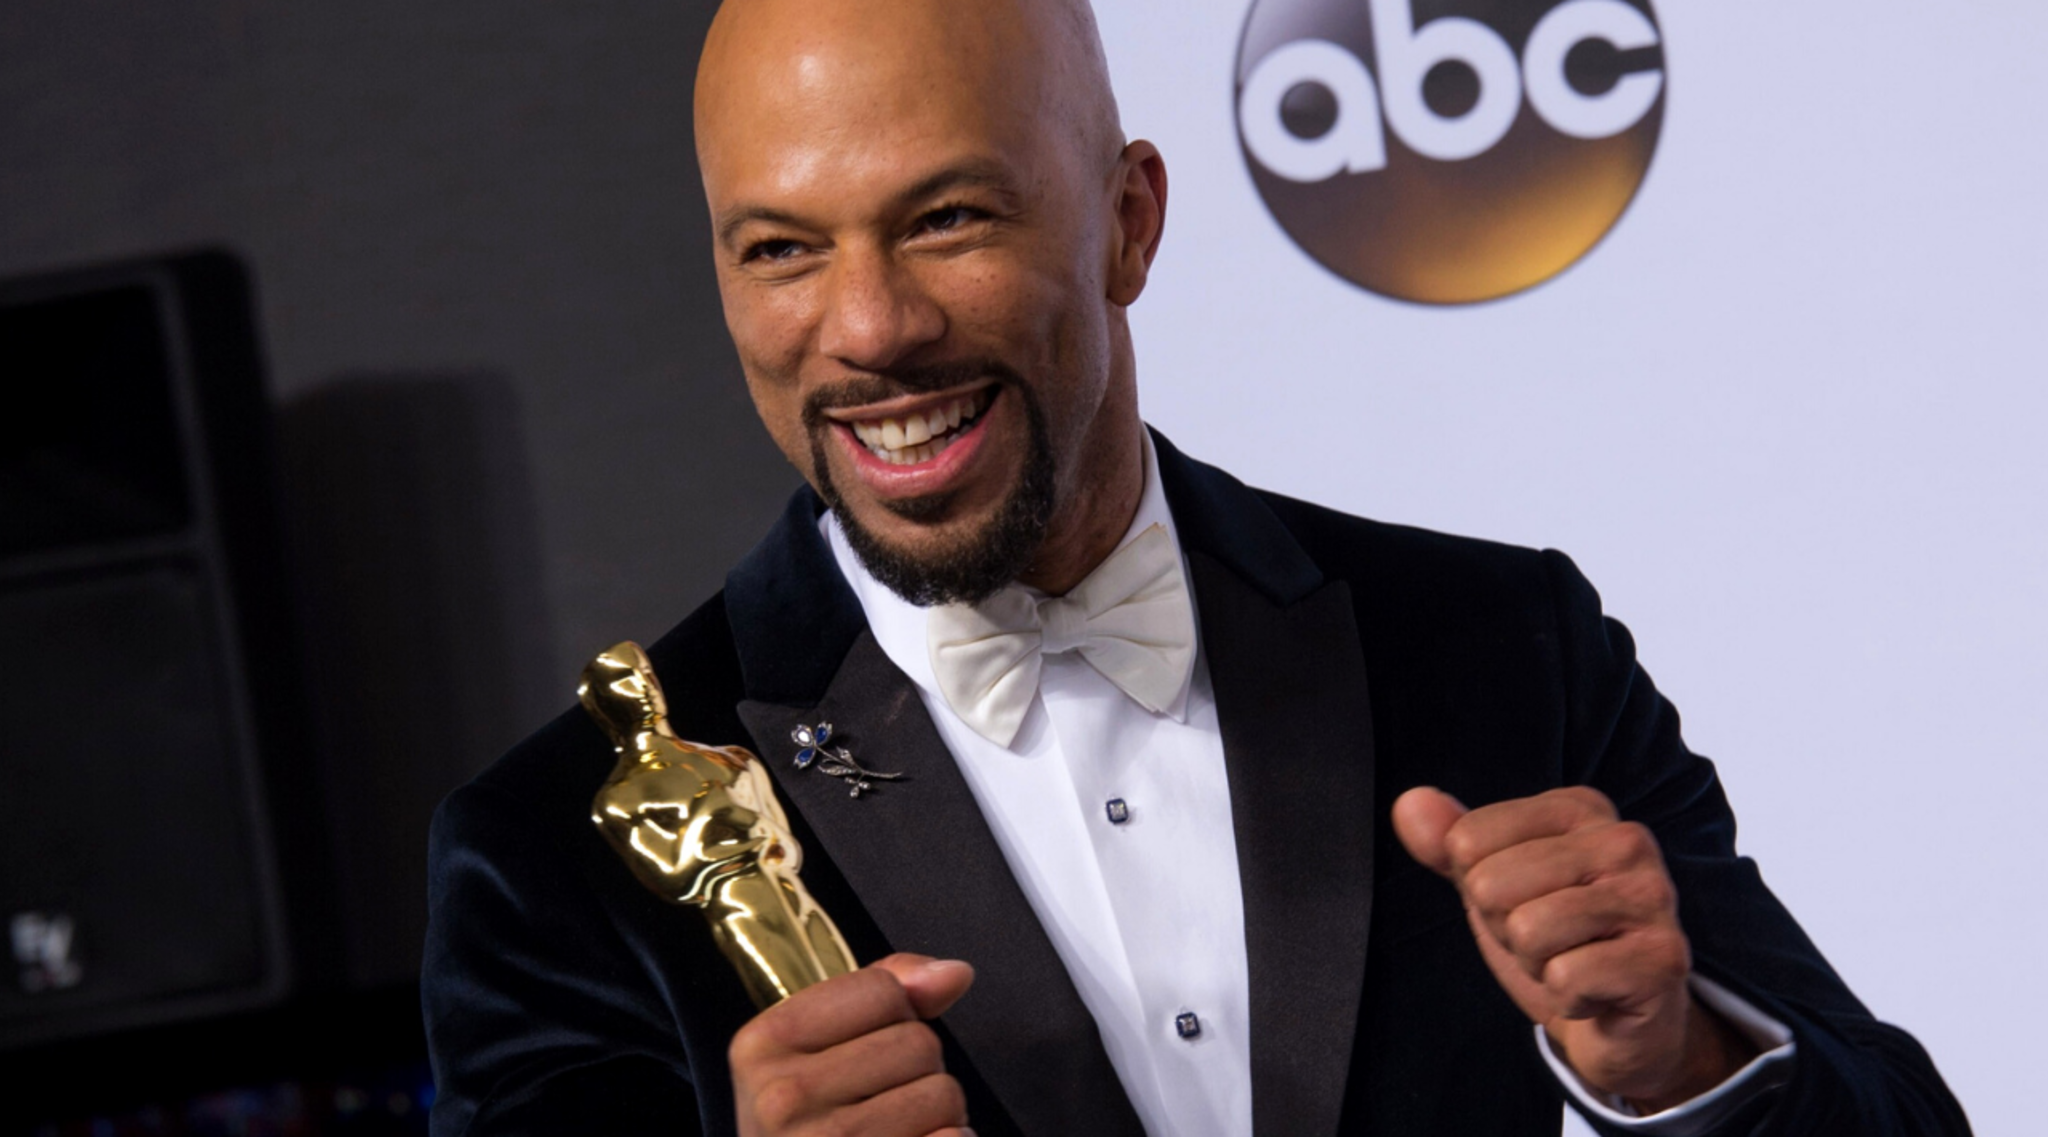 Common on the Significance of Accepting His 2015 Oscar Using the Name He Was 'Born With' (Exclusive) 